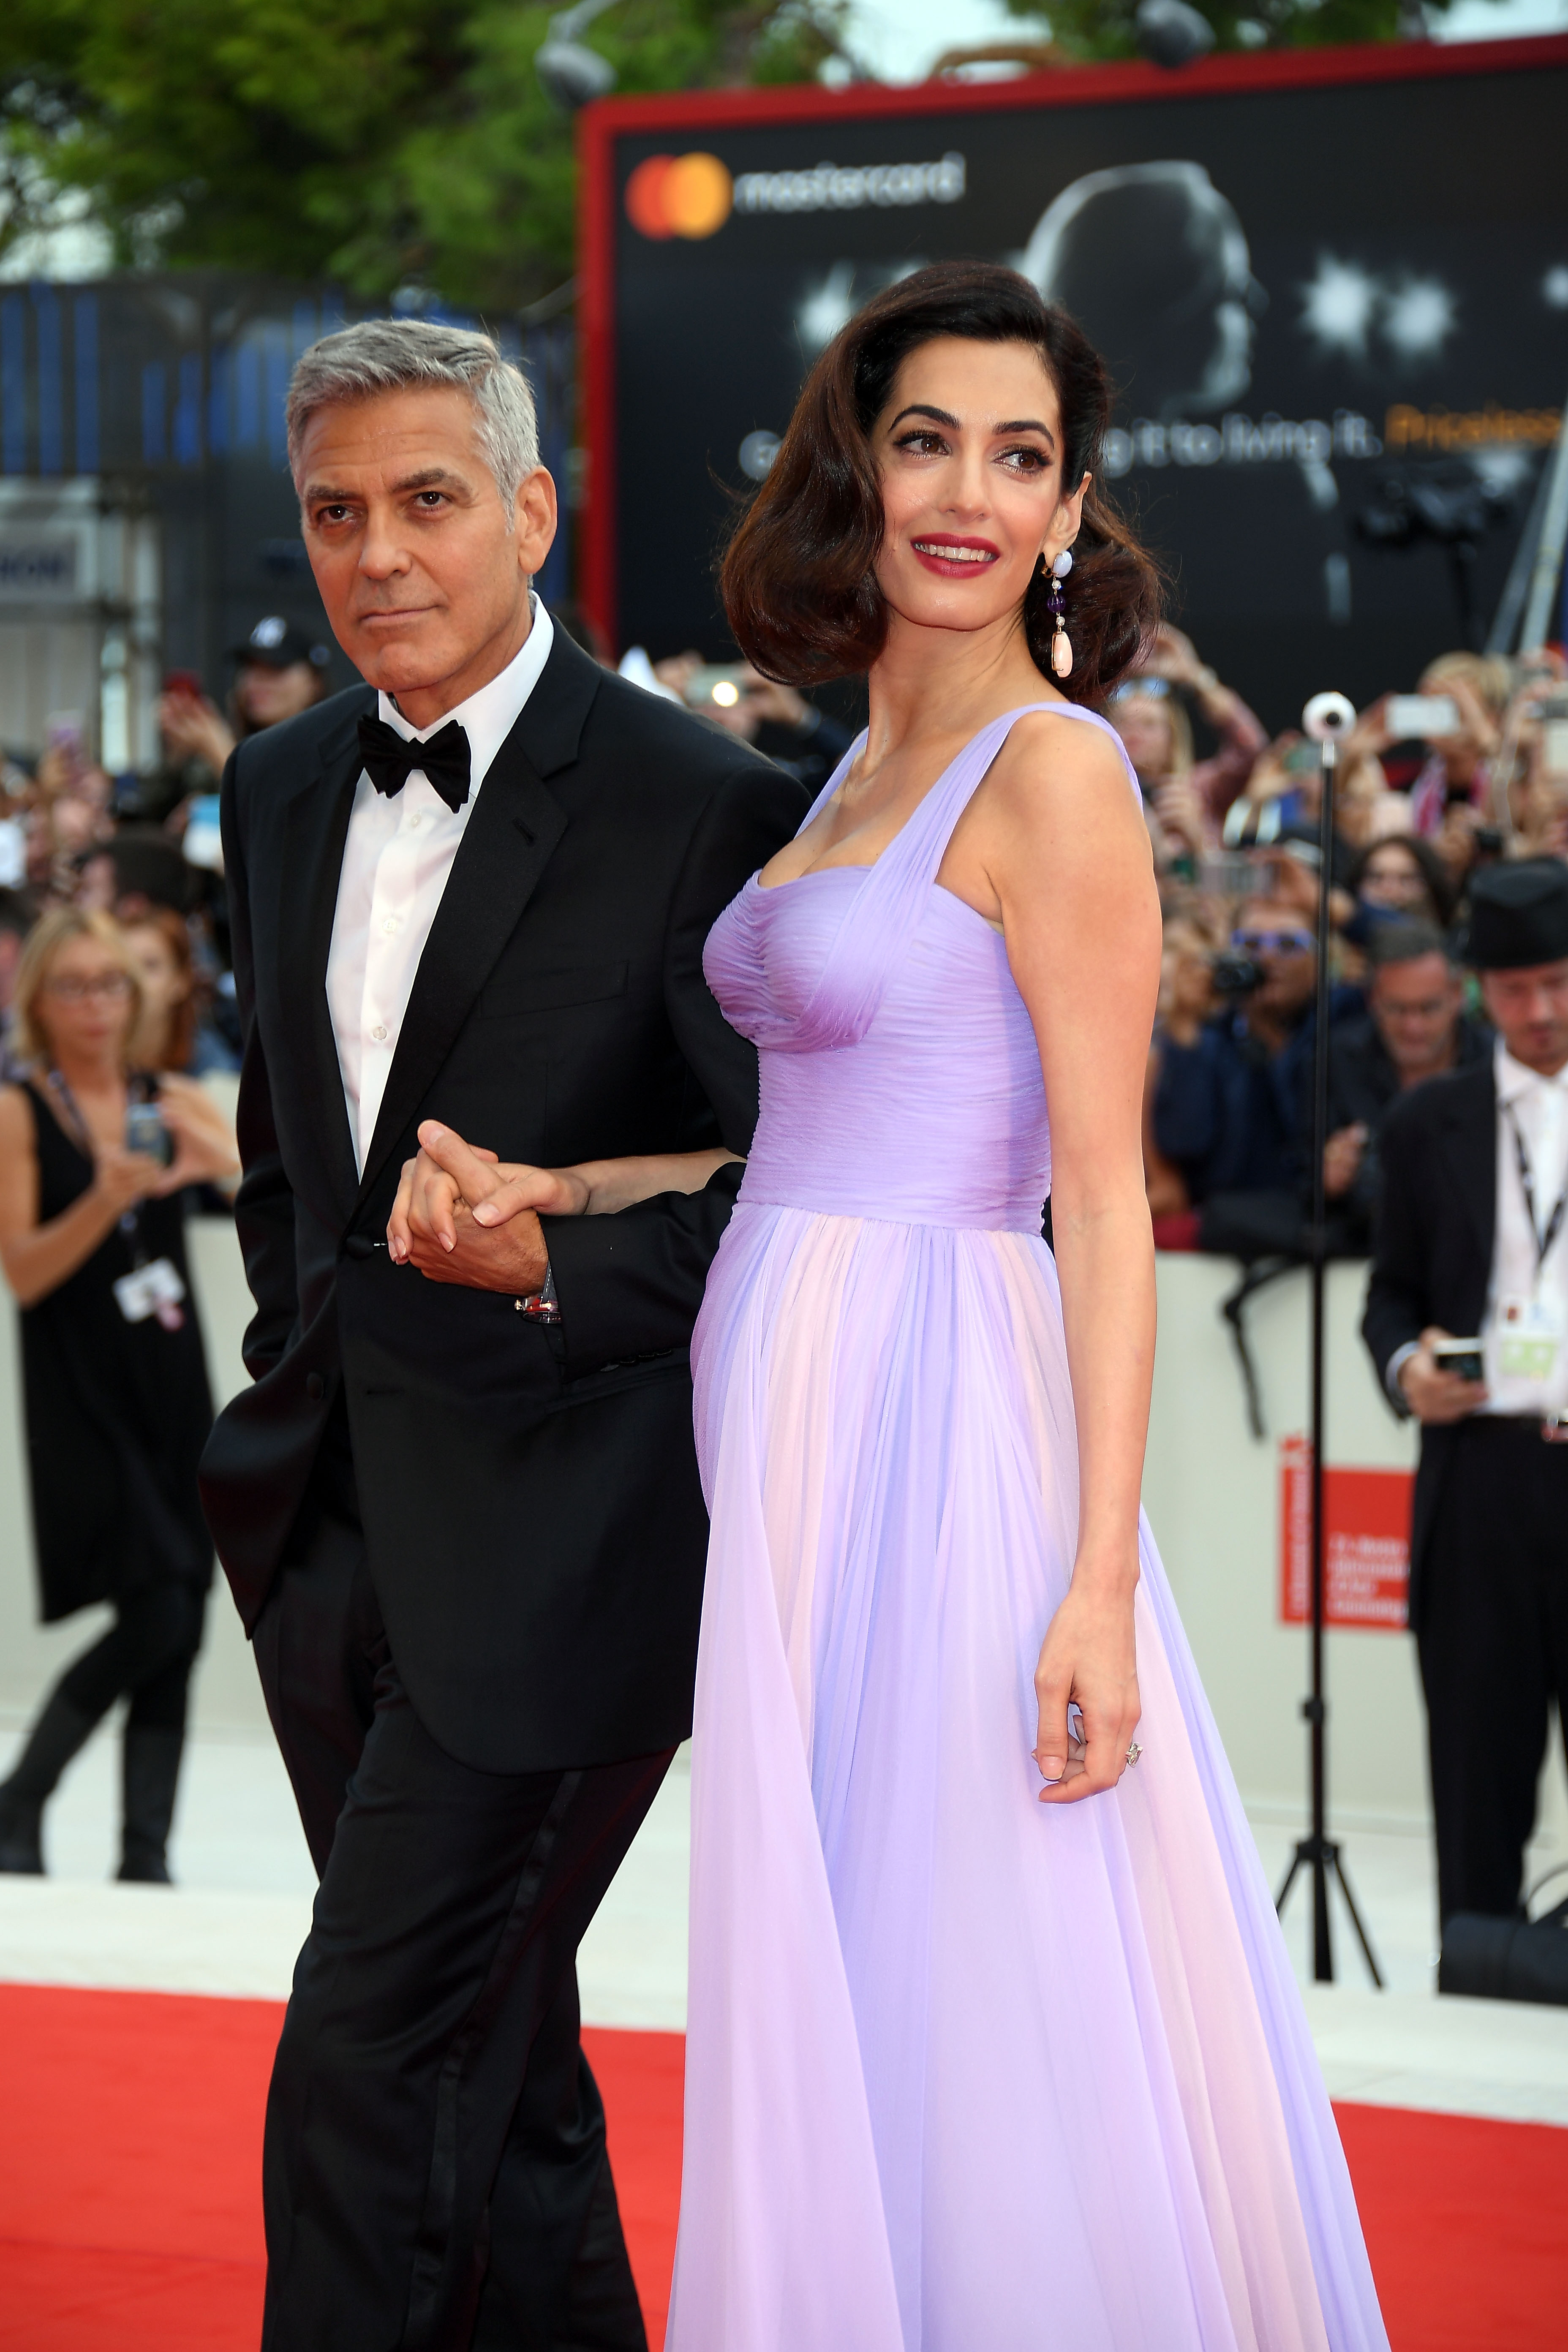 George Clooney and Amal Clooney at the "Suburbicon" screening during the 74th Venice Film Festival at Sala Grande on September 2, 2017 in Venice, Italy. | Source: Getty Images